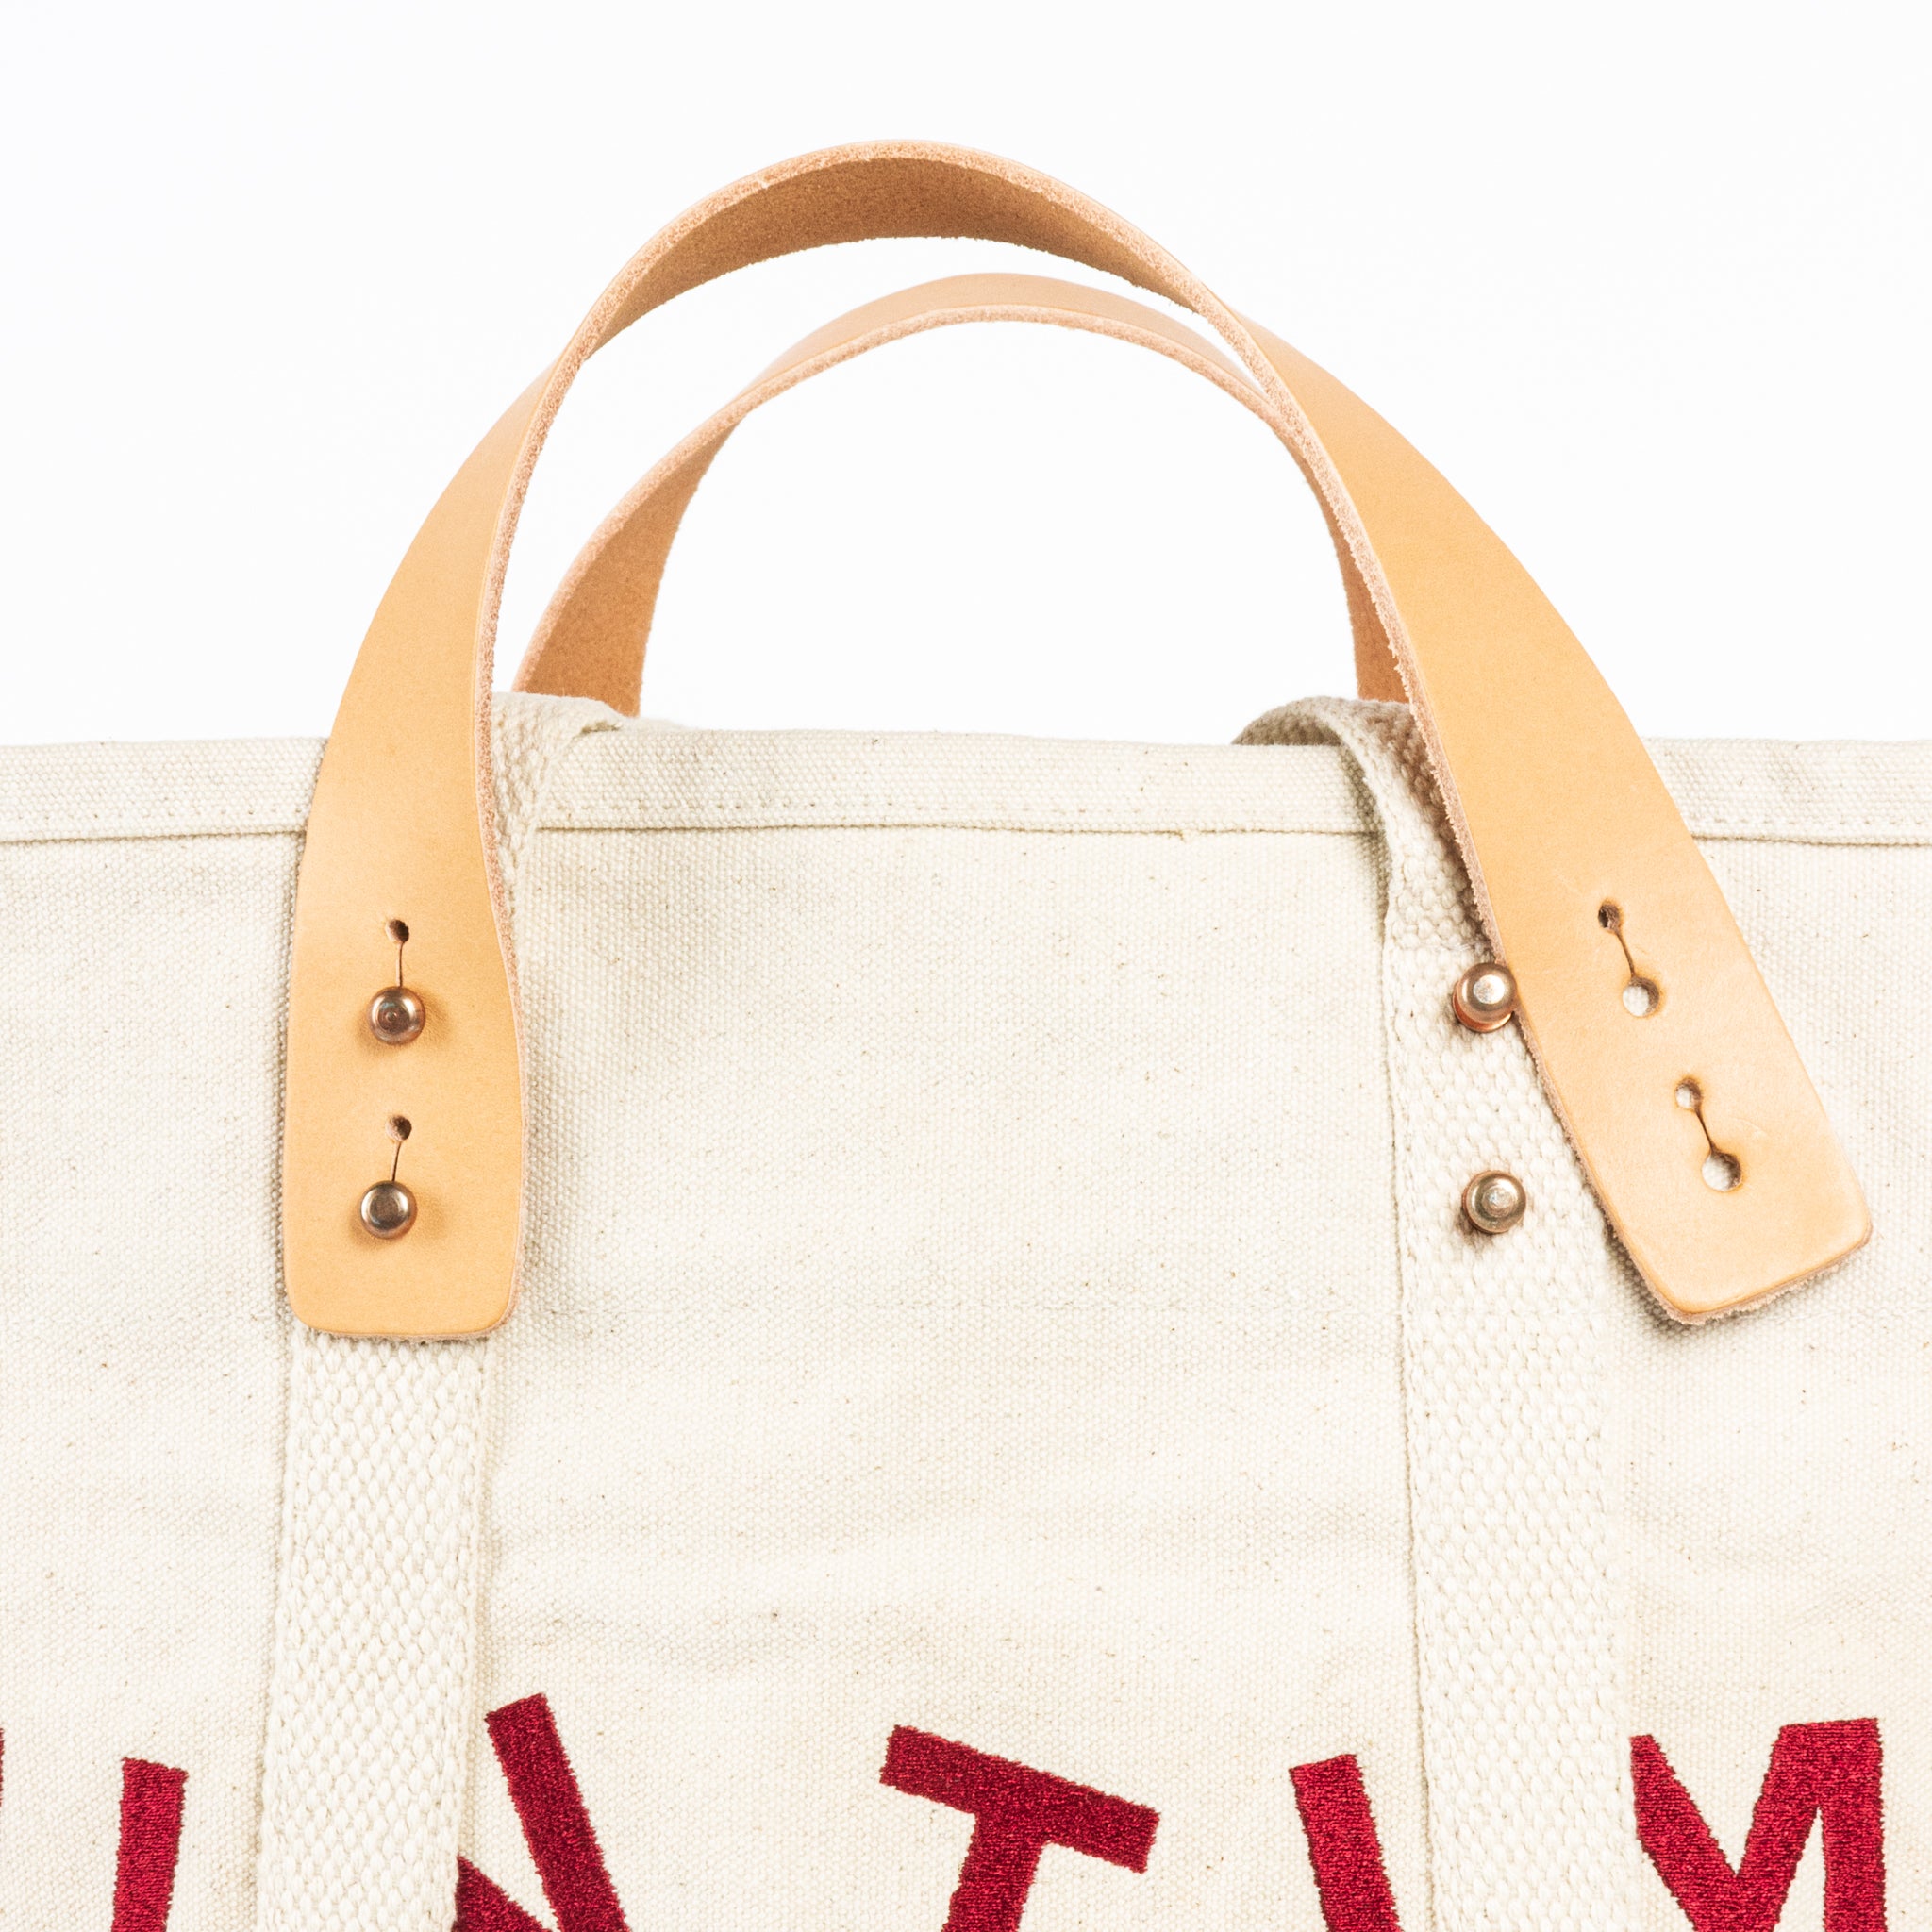 Immodest Cotton Tote in Fun Times